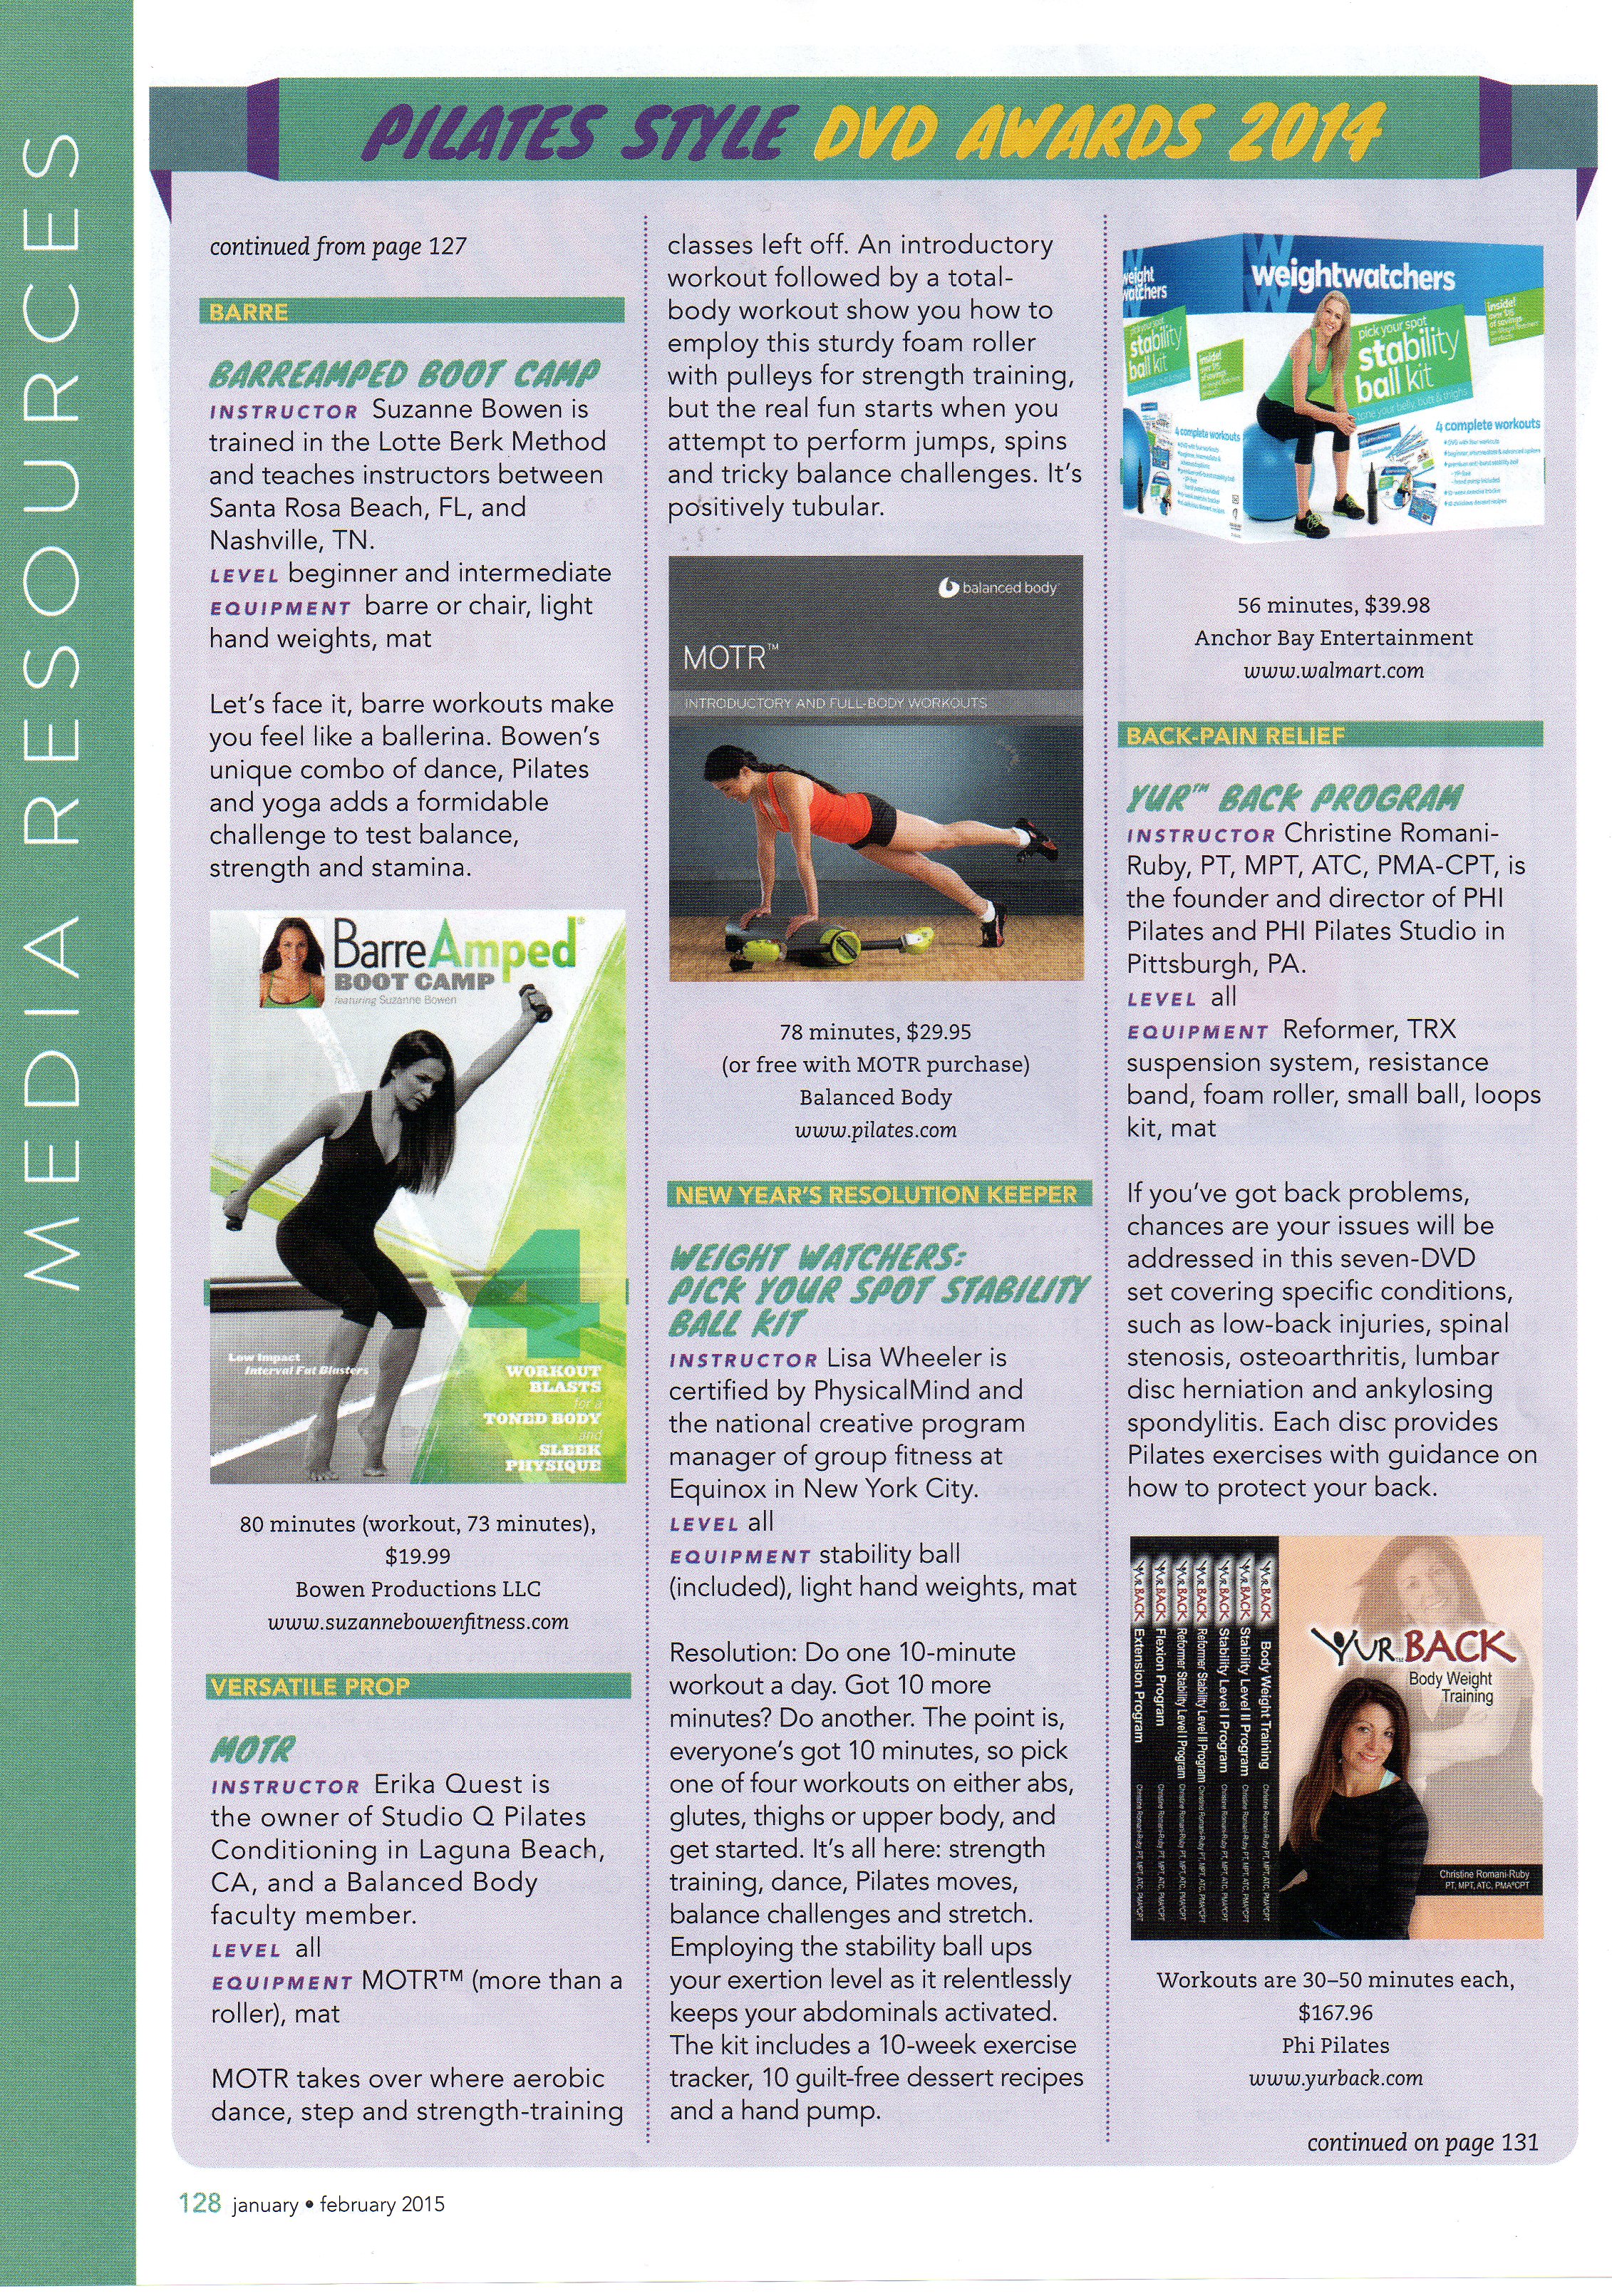 BarreAmped featured in Pilates Style 